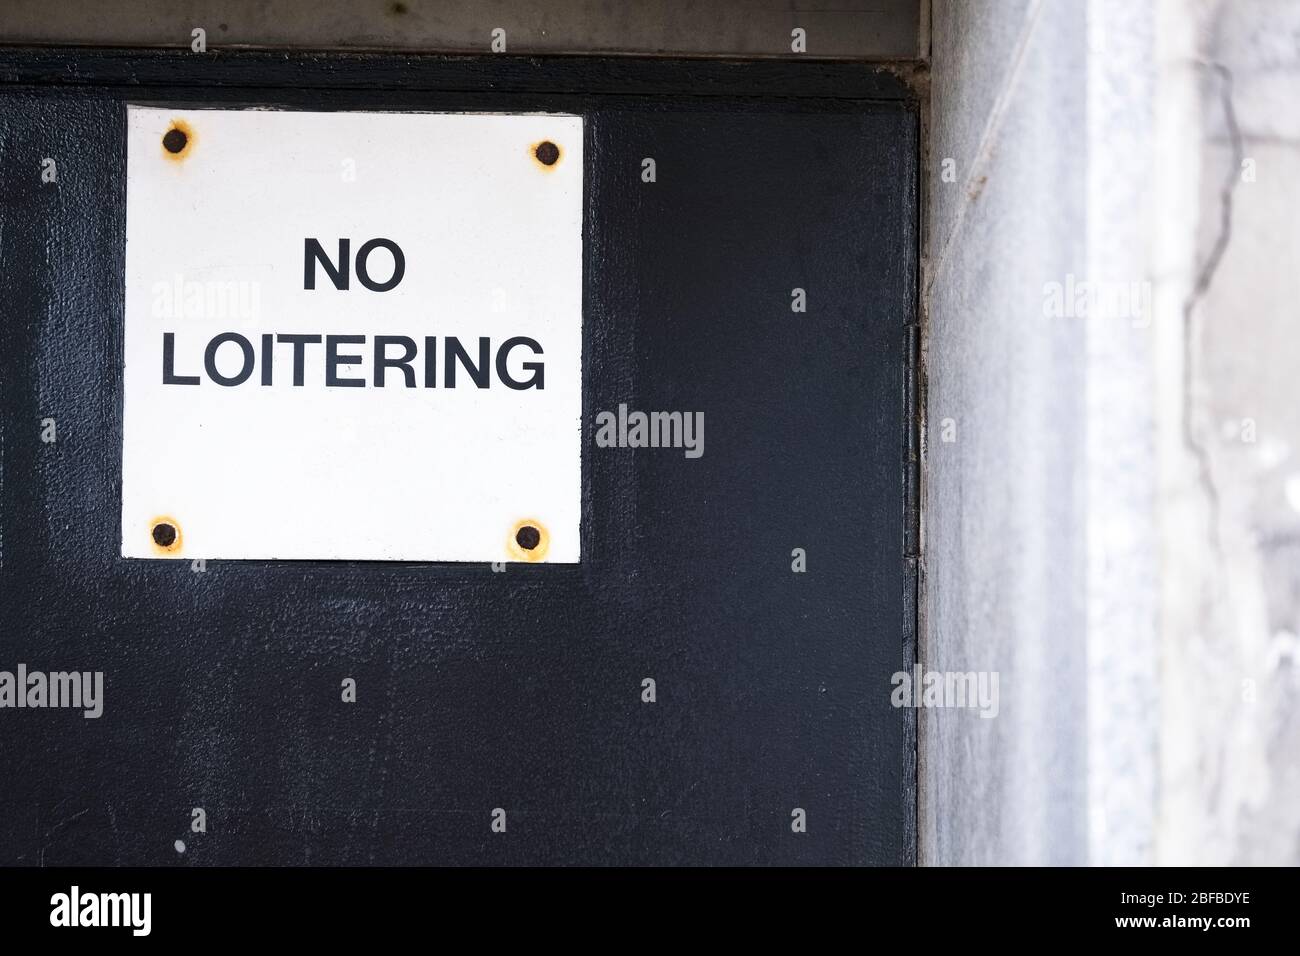 No loitering sign in London to fight knife crime in council estate Stock Photo